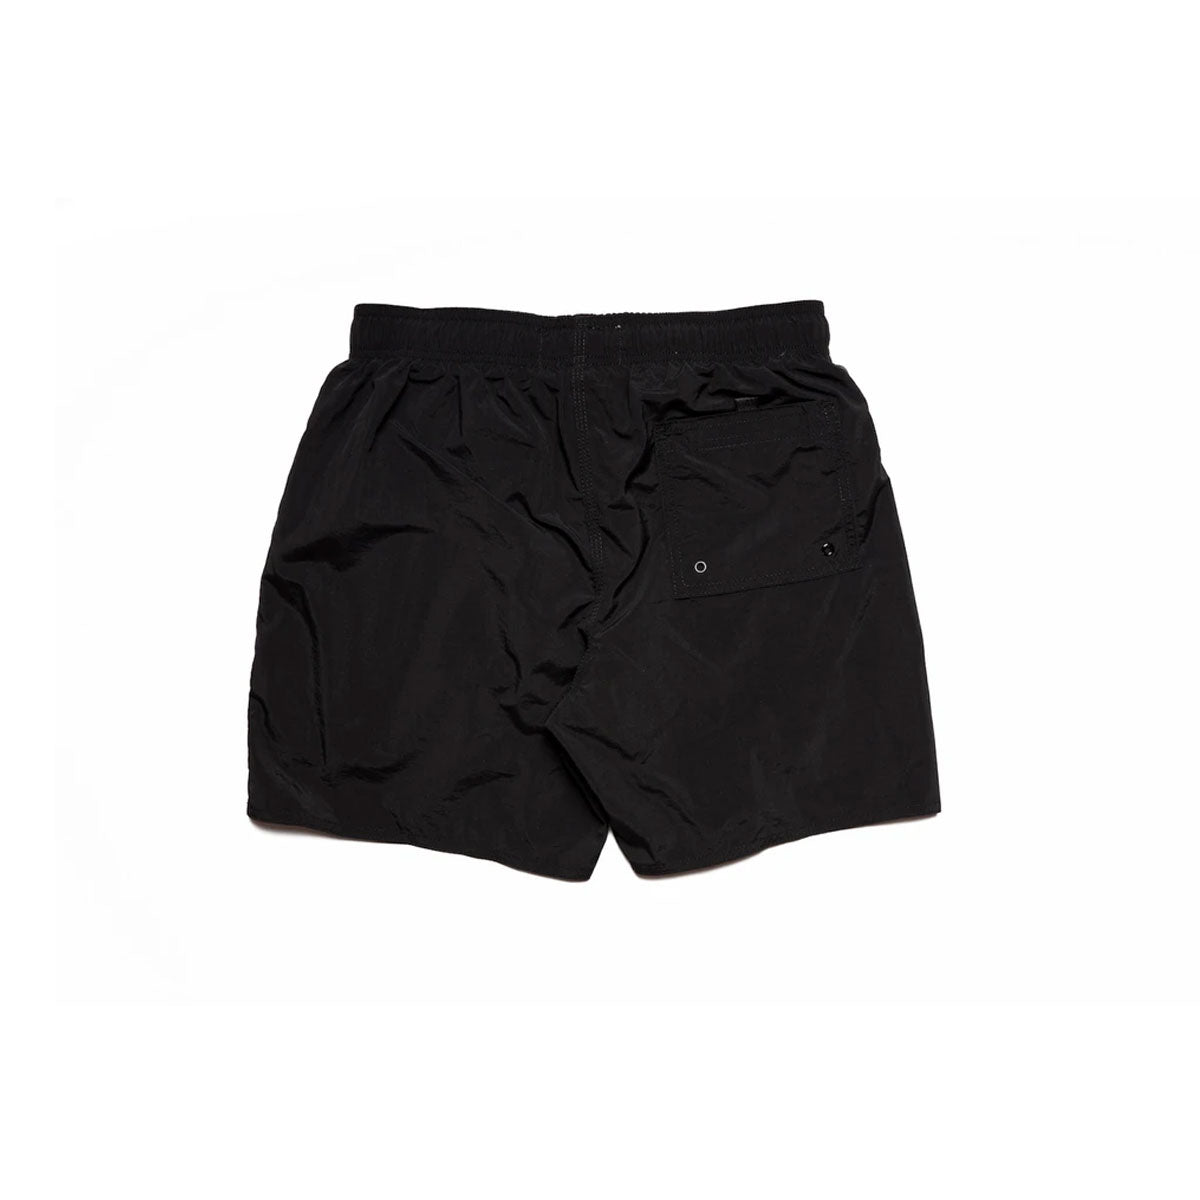 Afterschool Projects : Endless Summer Swim Trunks : Black : Large